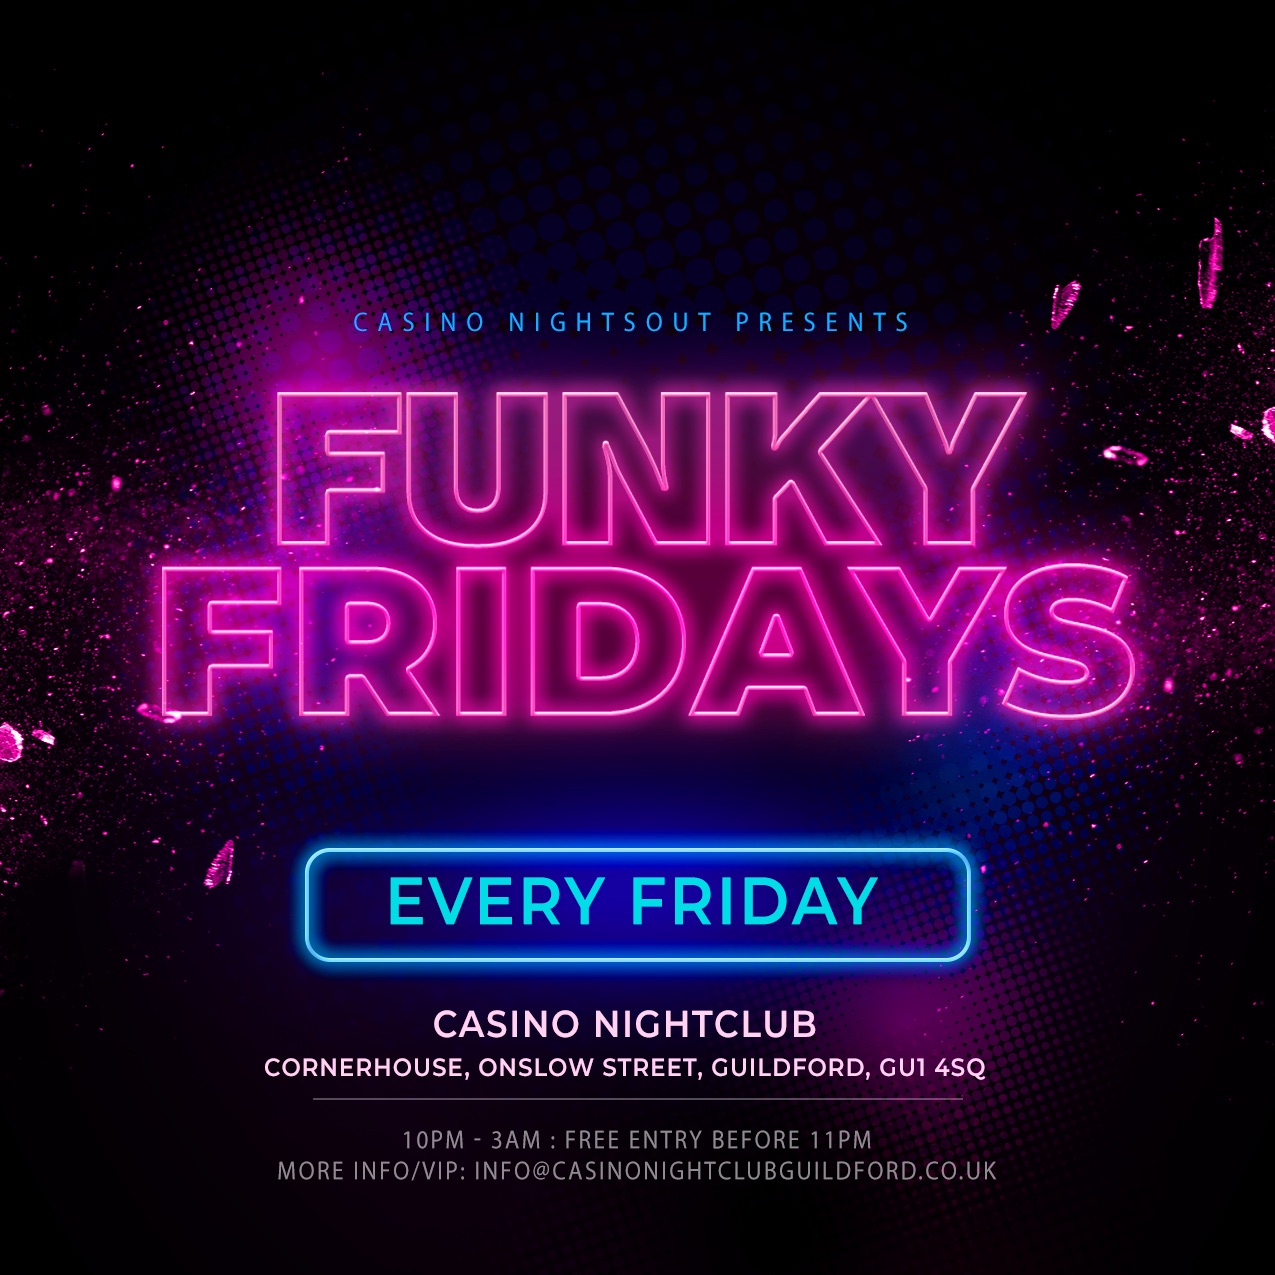 Funky Friday (@funkyfriday) Official